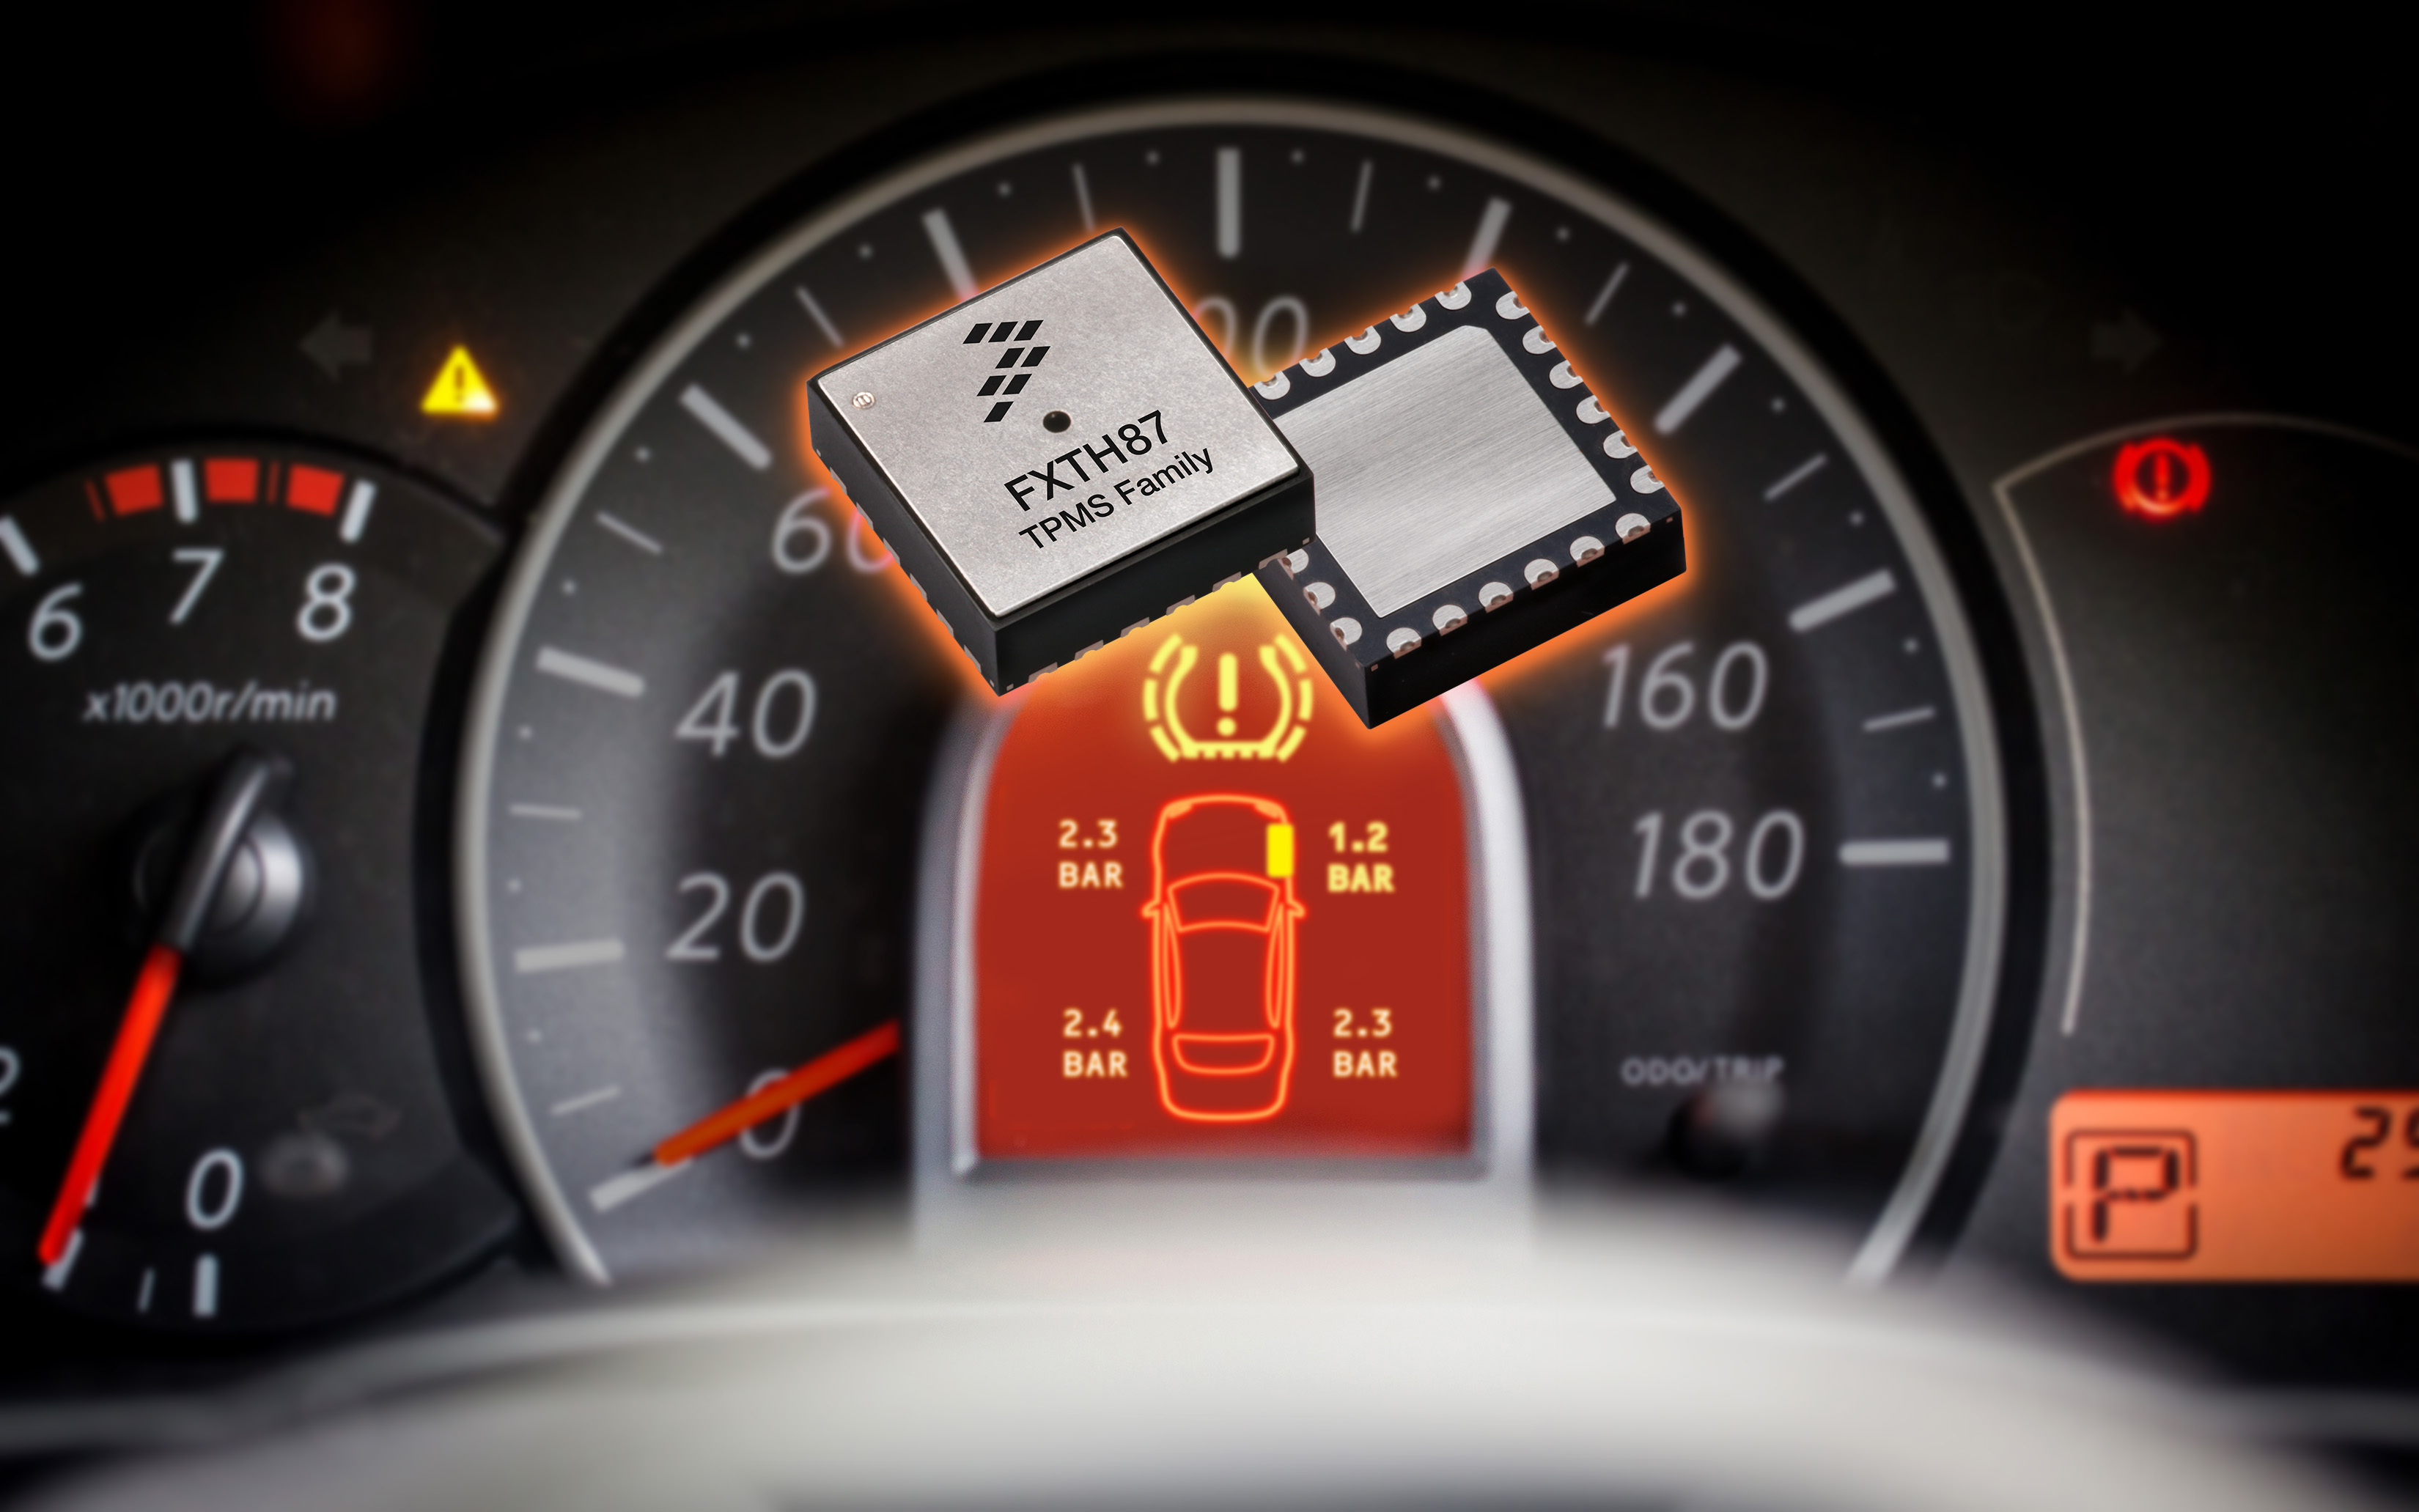 Freescale claims smallest TPMS in world